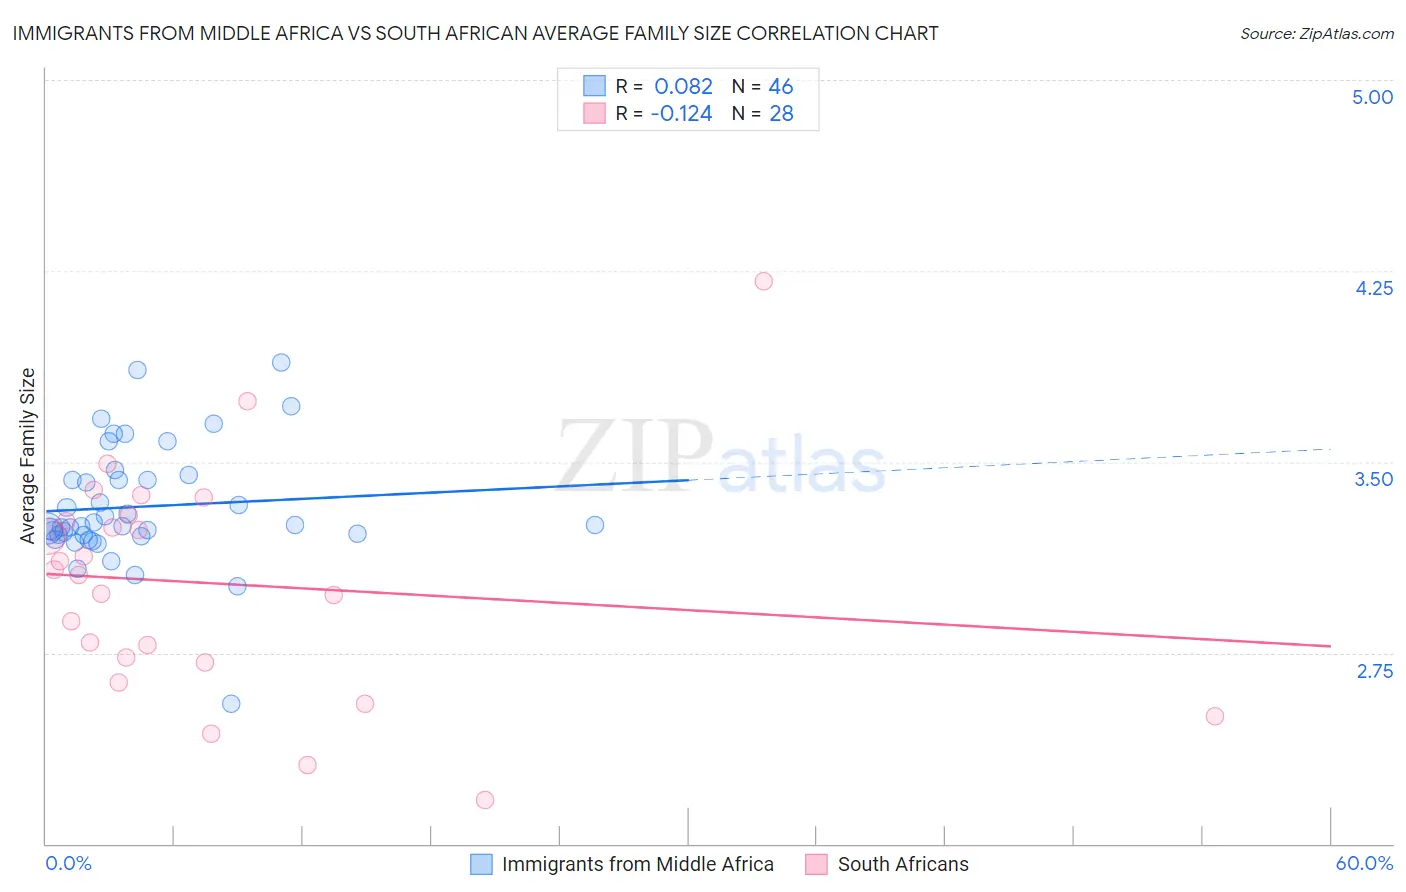 Immigrants from Middle Africa vs South African Average Family Size